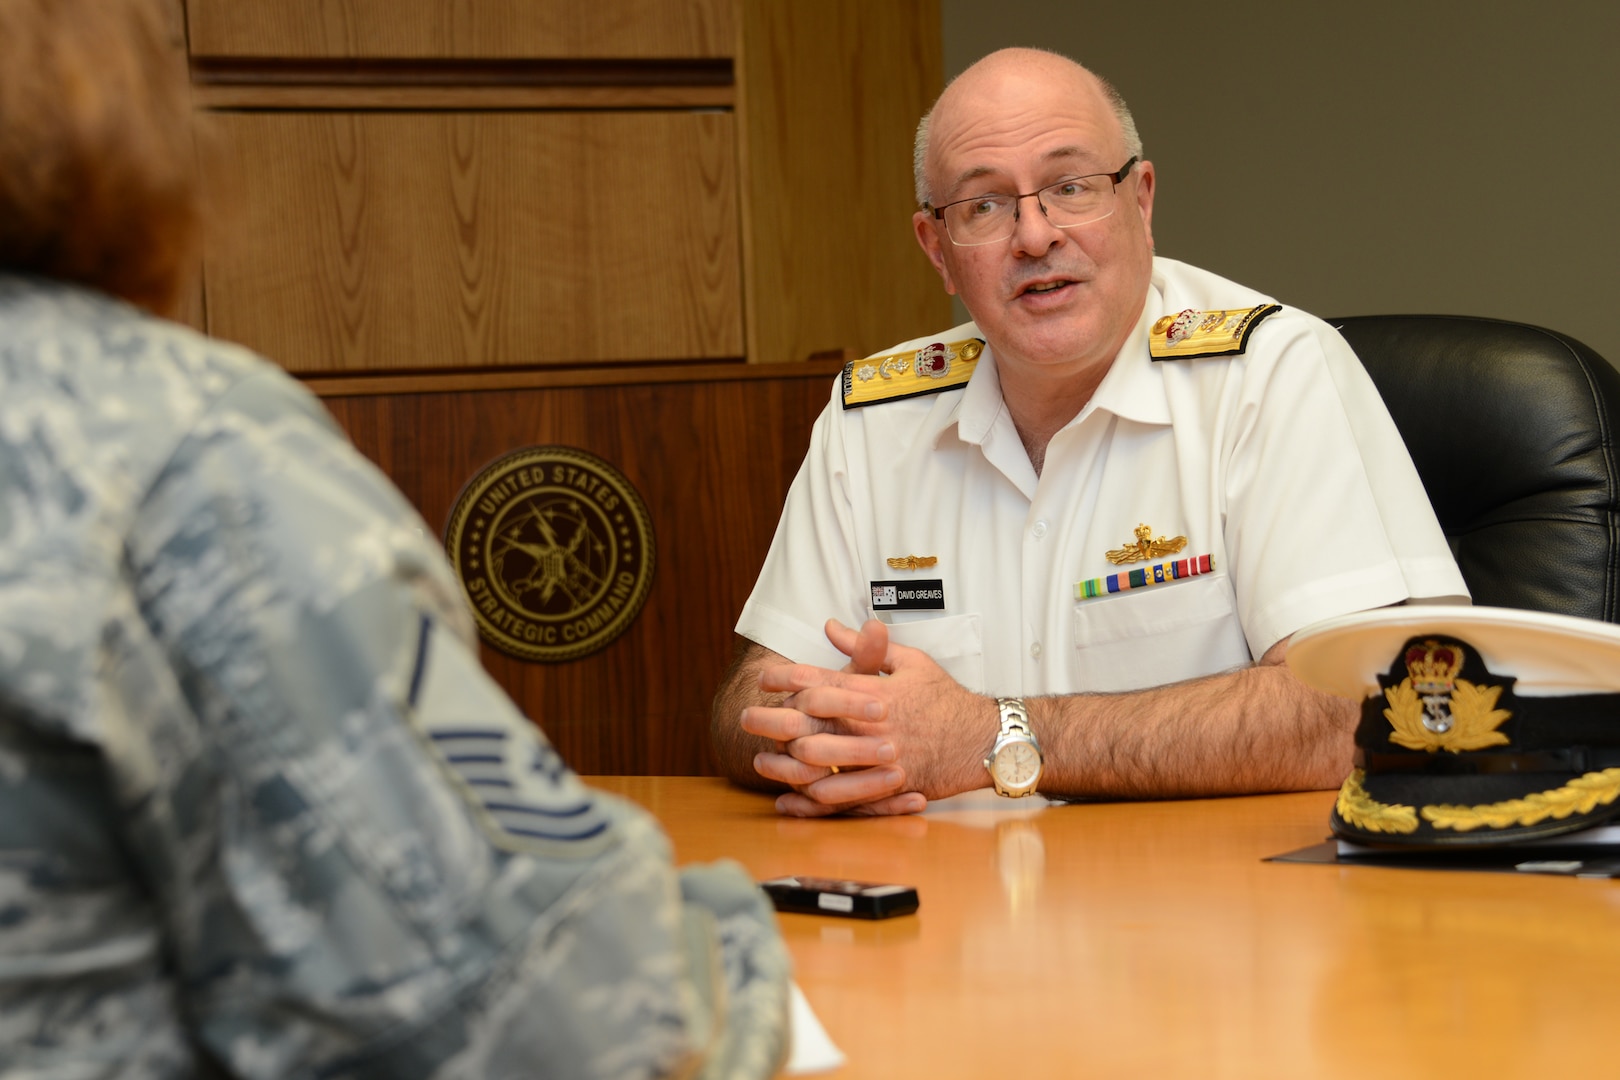 Royal Australian Navy Commodore David Greaves, Australian Chief Information Officer Group strategic communications branch commander, answers questions during an interview at U.S. Strategic Command (USSTRATCOM) Headquarters, Offutt Air Force Base, Neb., May 6, 2016. While here, Greaves held discussions with senior leaders and subject matter experts from USSTRATCOMâ€™s command, control, communications, and computers (C4) directorate, on the status of current satellite communications agreements between Australia and the U.S., as well as future arrangements. The visit is part of USSTRATCOM'S ongoing effort to build, sustain and support partnerships with allied nations. One of nine DoD unified combatant commands, USSTRATCOM has global strategic missions, assigned through the Unified Command Plan, which include strategic deterrence; space operations; cyberspace operations; joint electronic warfare; global strike; missile defense; intelligence, surveillance and reconnaissance; combating weapons of mass destruction; and analysis and targeting. (U.S. Navy photo by Mass Communication Specialist 1st Class Byron C. Linder/Released)